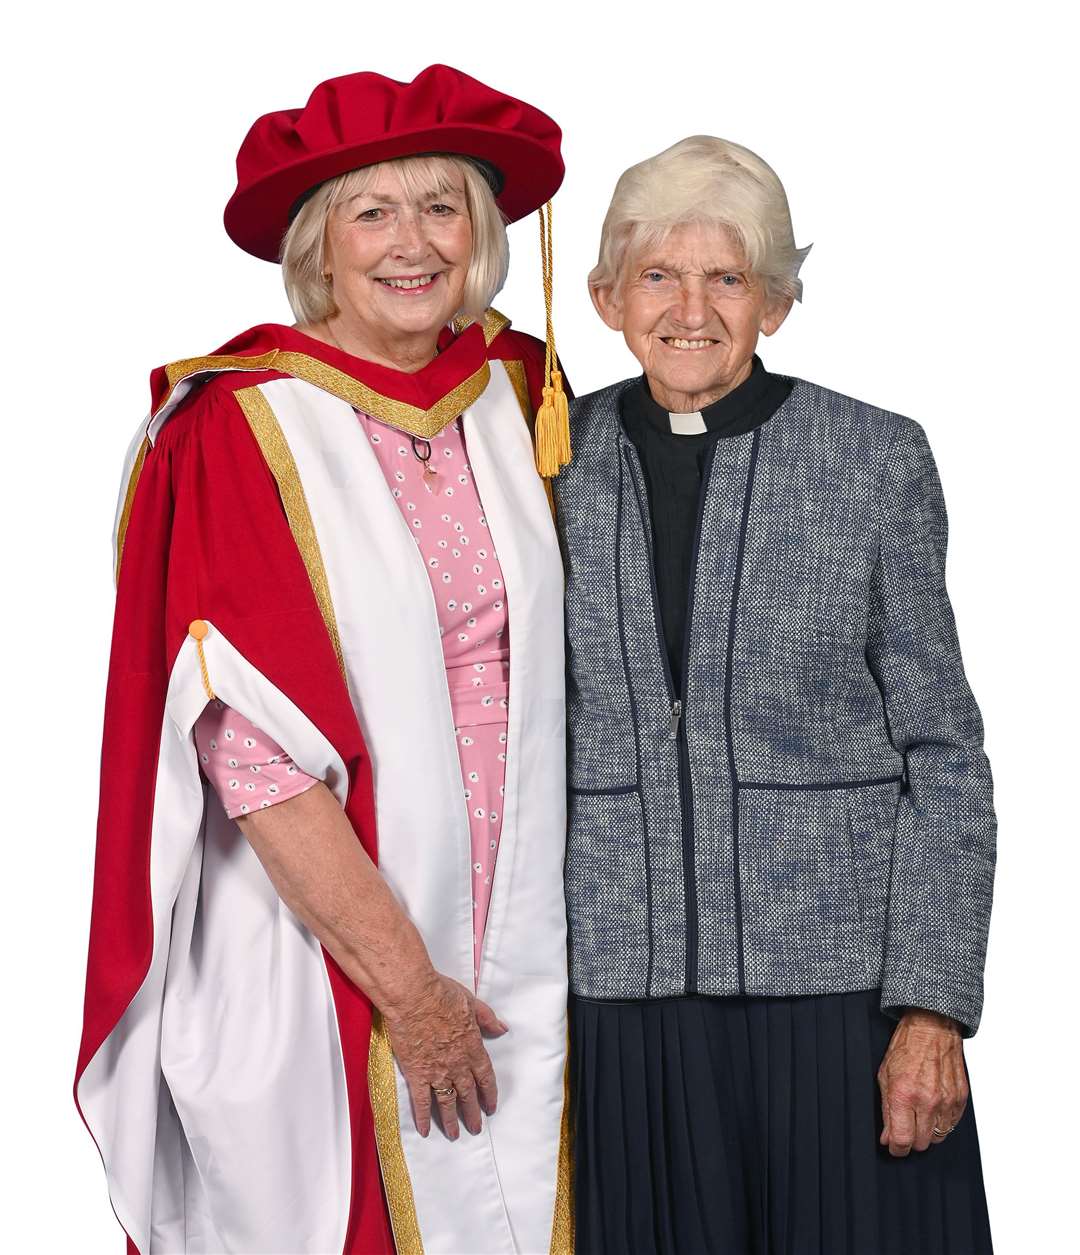 Rural Coffee Caravan CEO Ann Osborn with the charity's founder the Rev Canon Sally Fogden at the ceremony where Ann was awarded an honorary doctorate by the University of Suffolk.